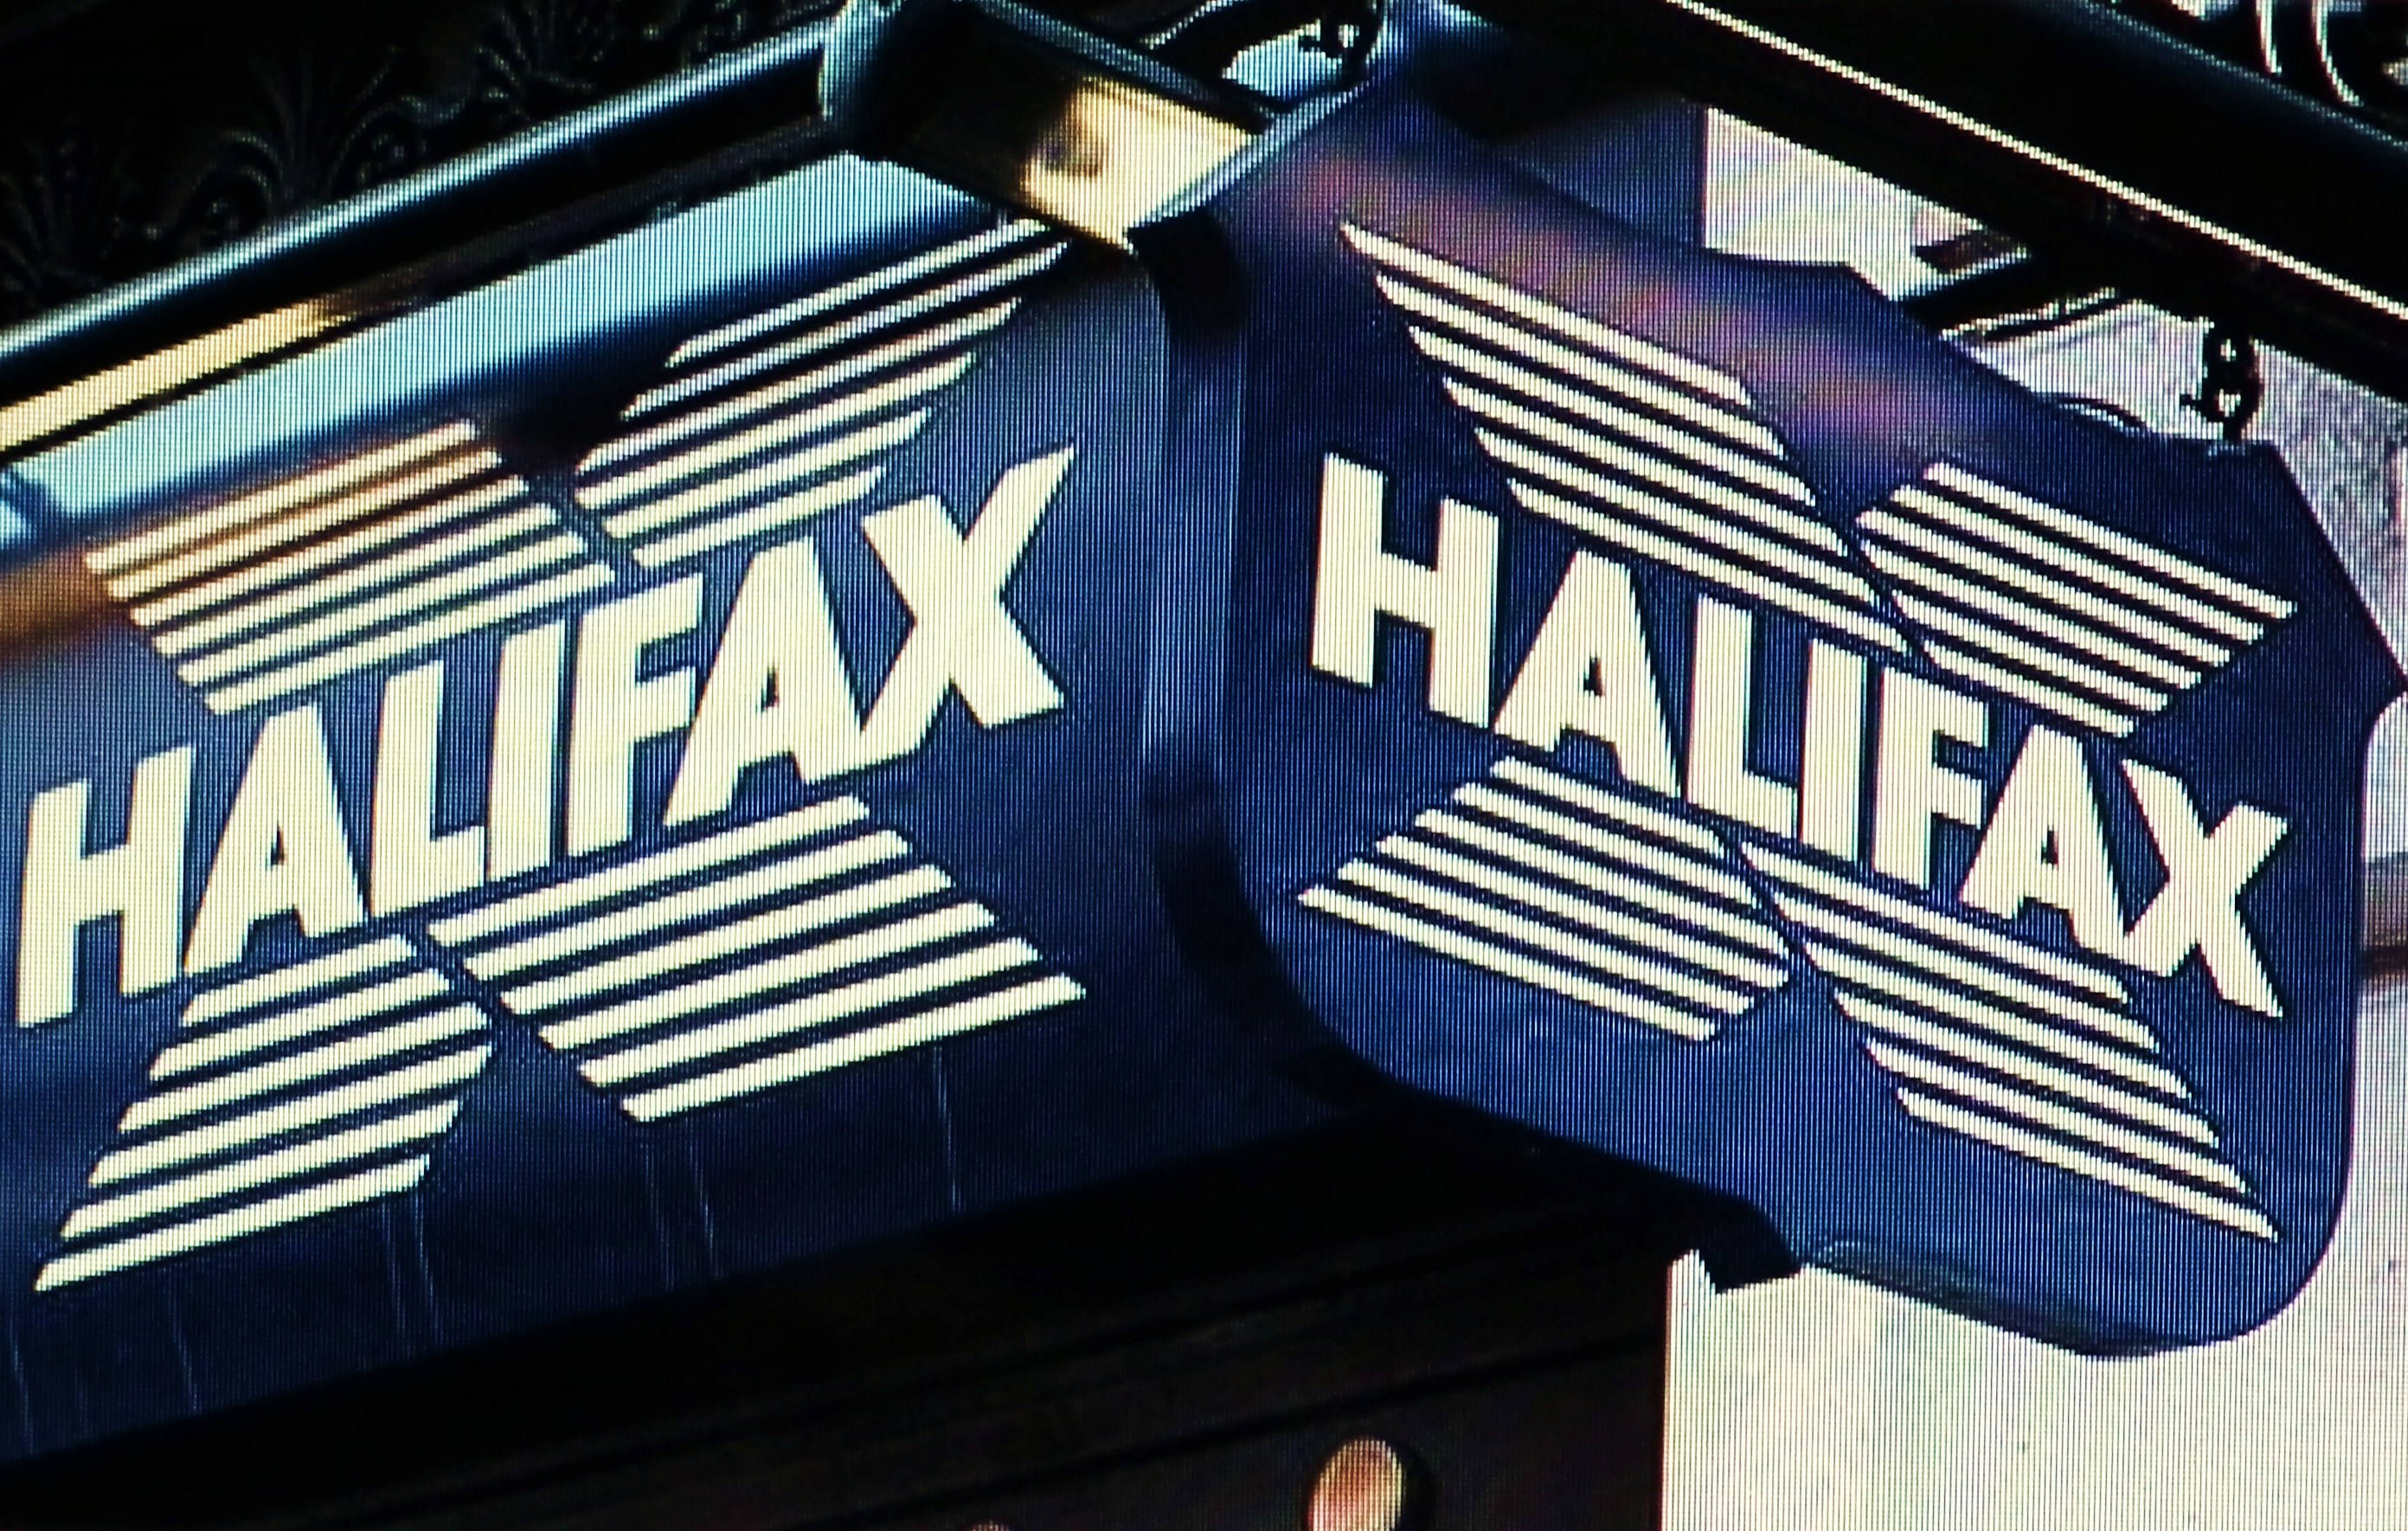 Halifax Standard Variable Rate – making you pay Xtra…